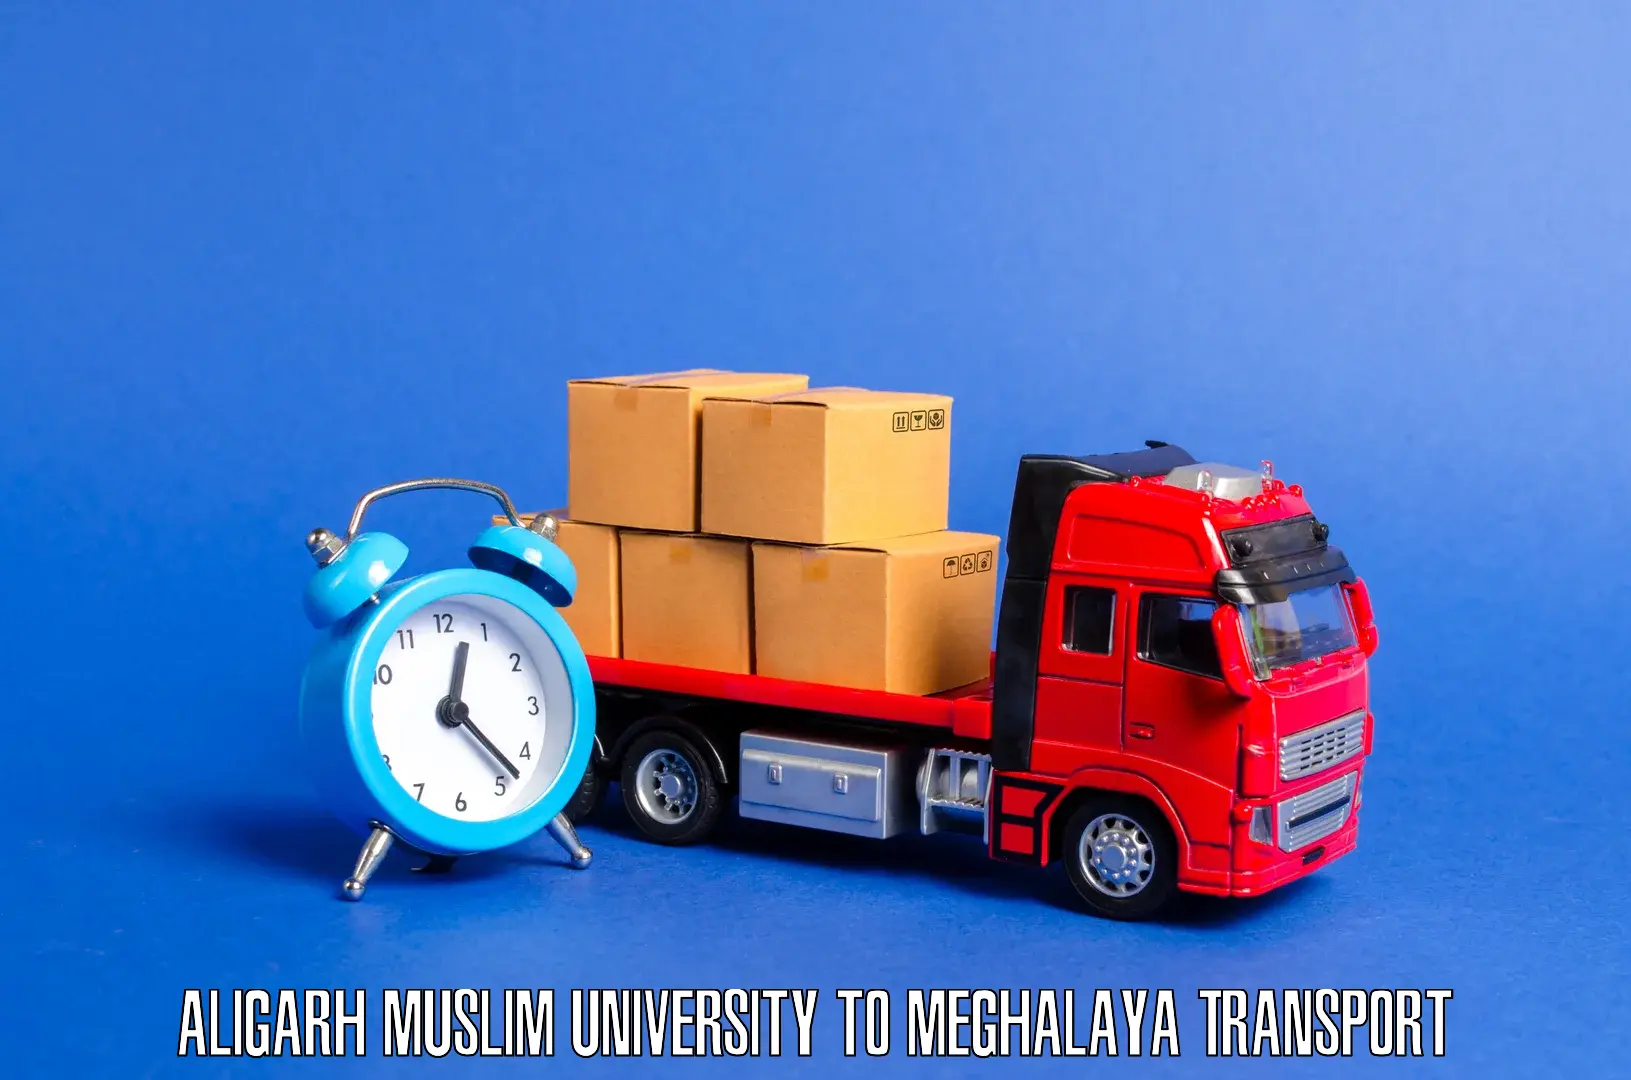 Express transport services Aligarh Muslim University to Shillong